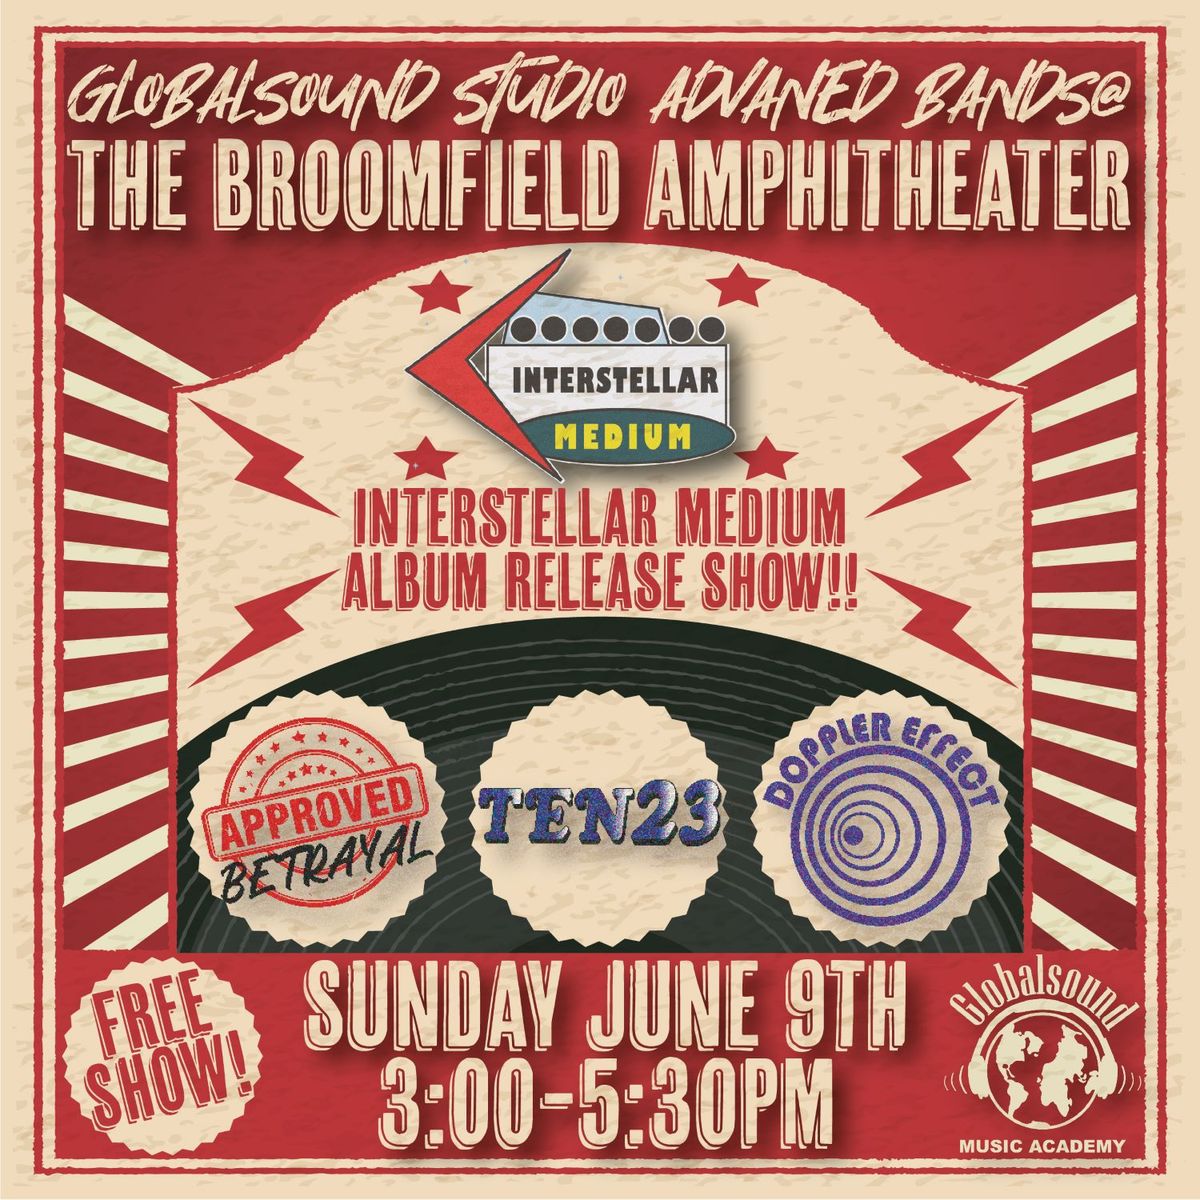 Globalsound Advanced Bands at the Broomfield Amphitheater